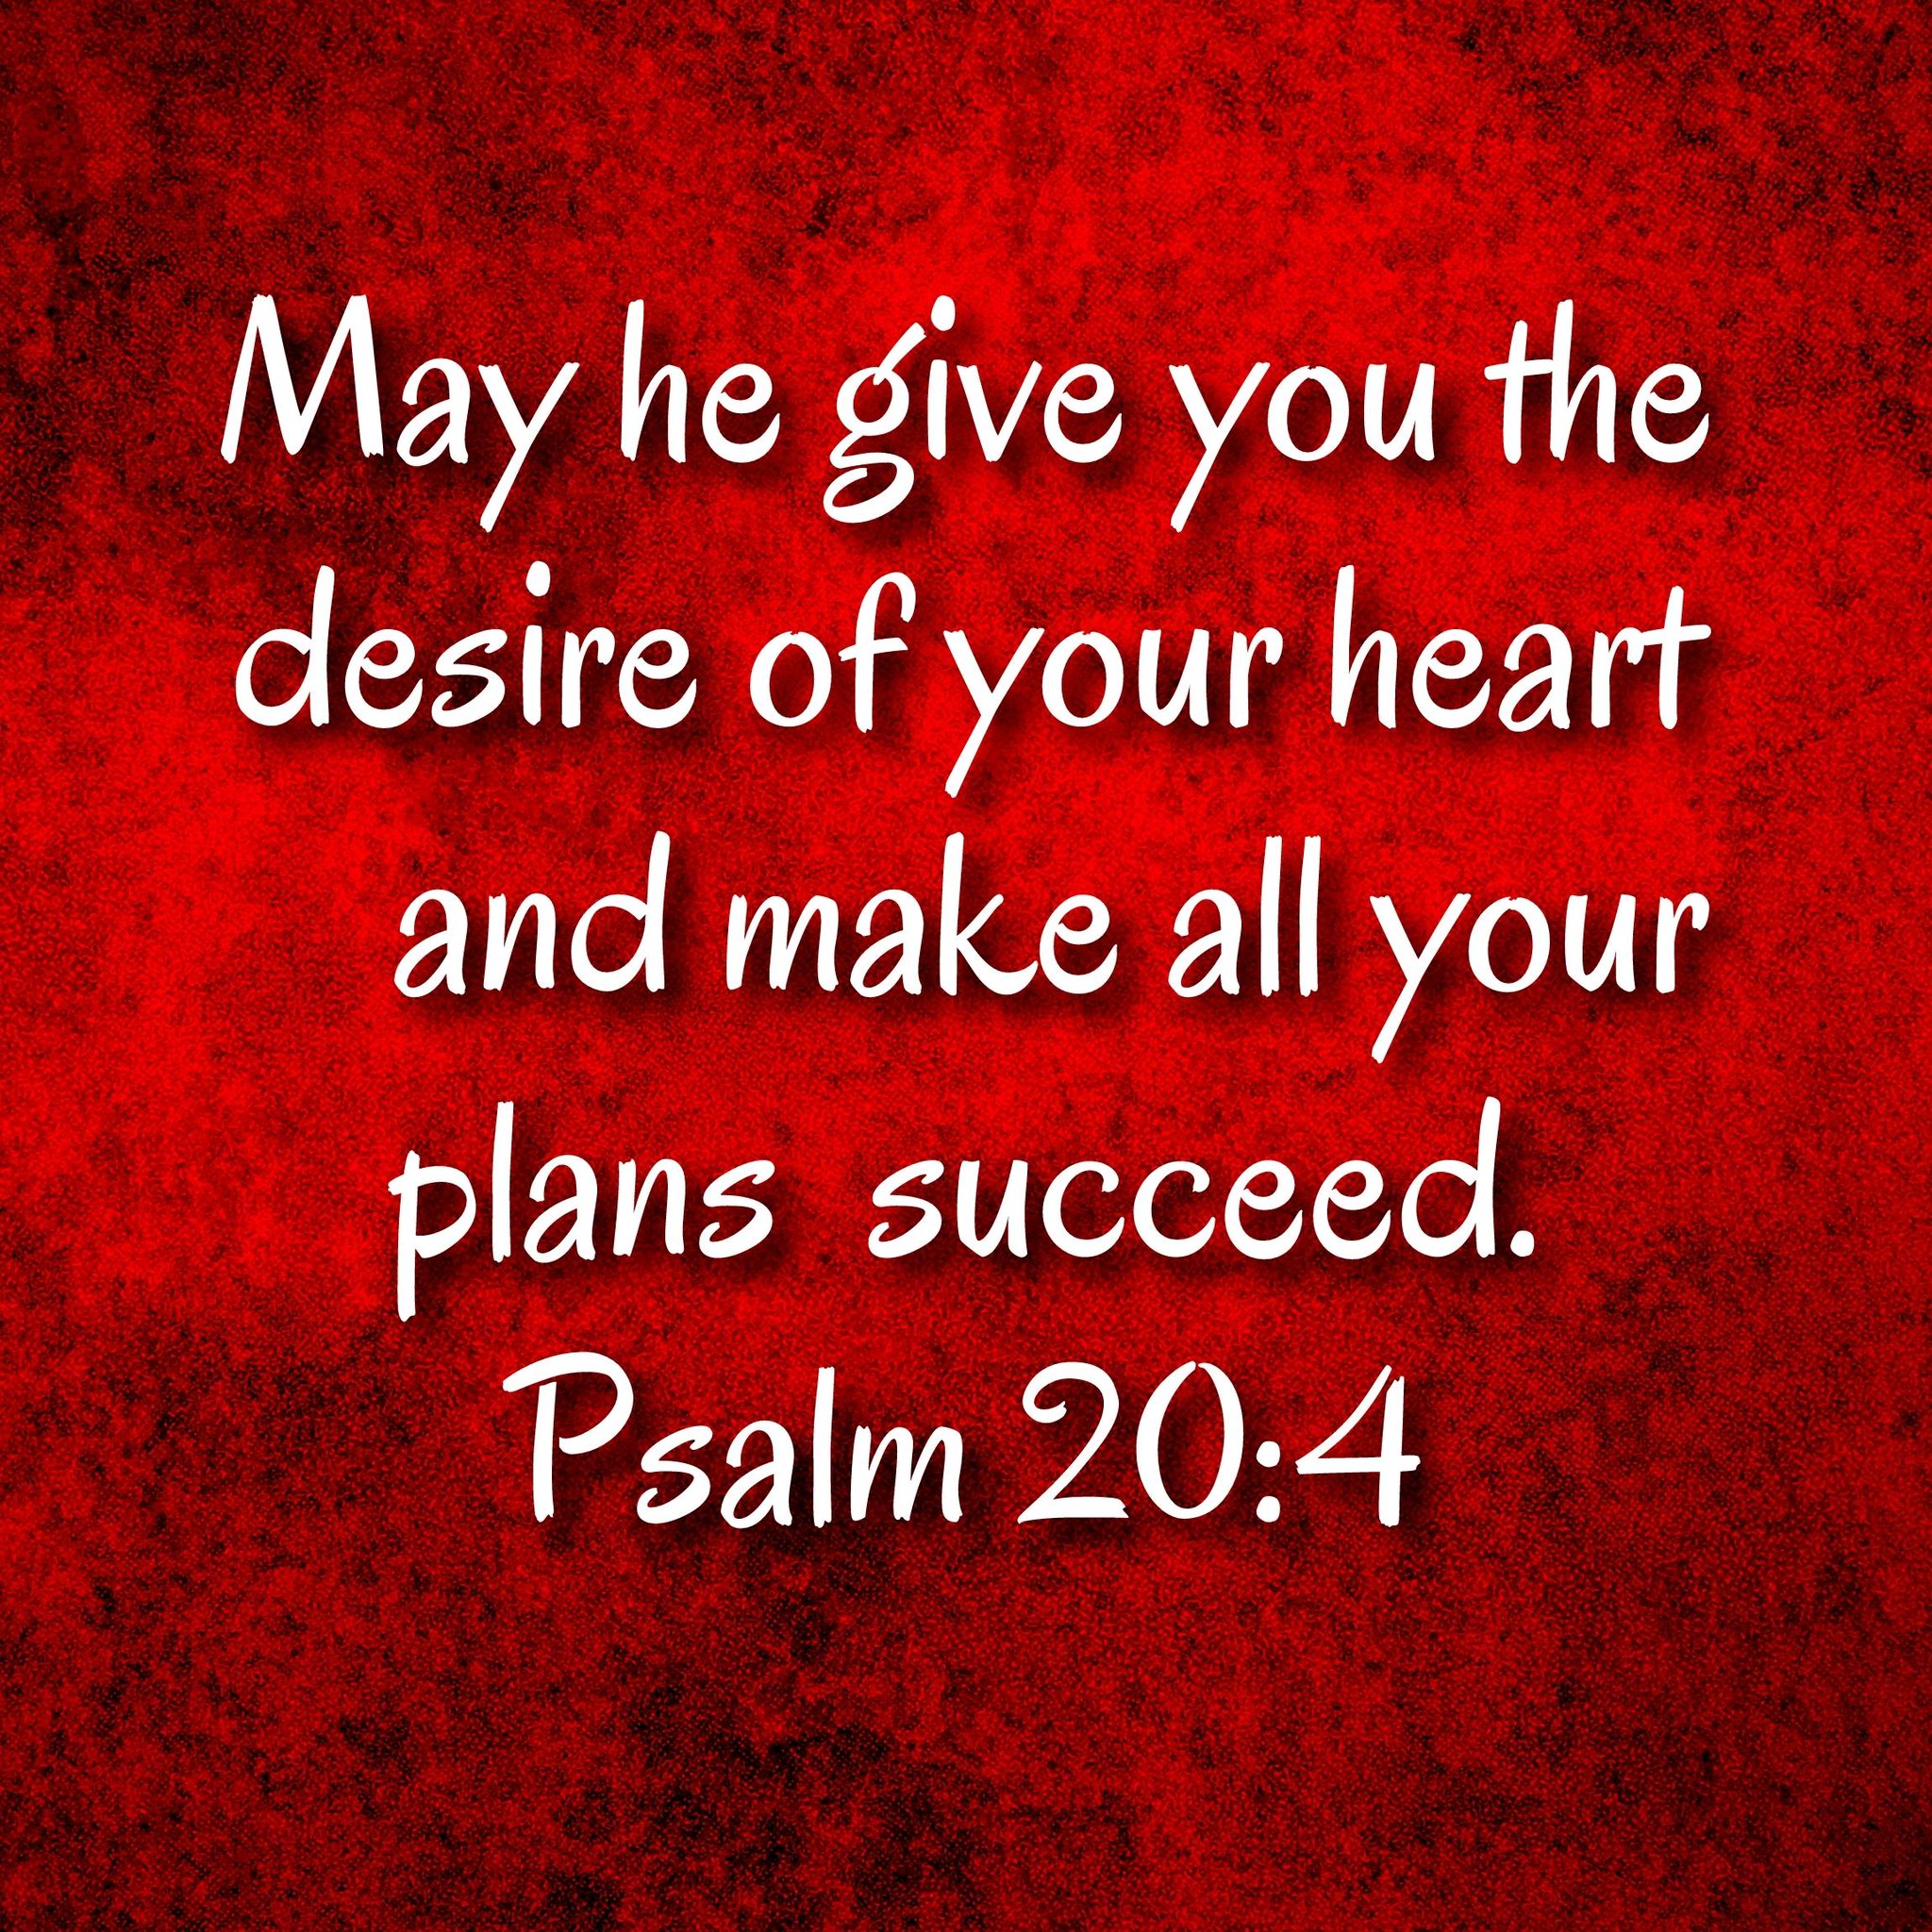 he give You the desire of yourheart and make allyour succeed: Psalm 20.4 May plans